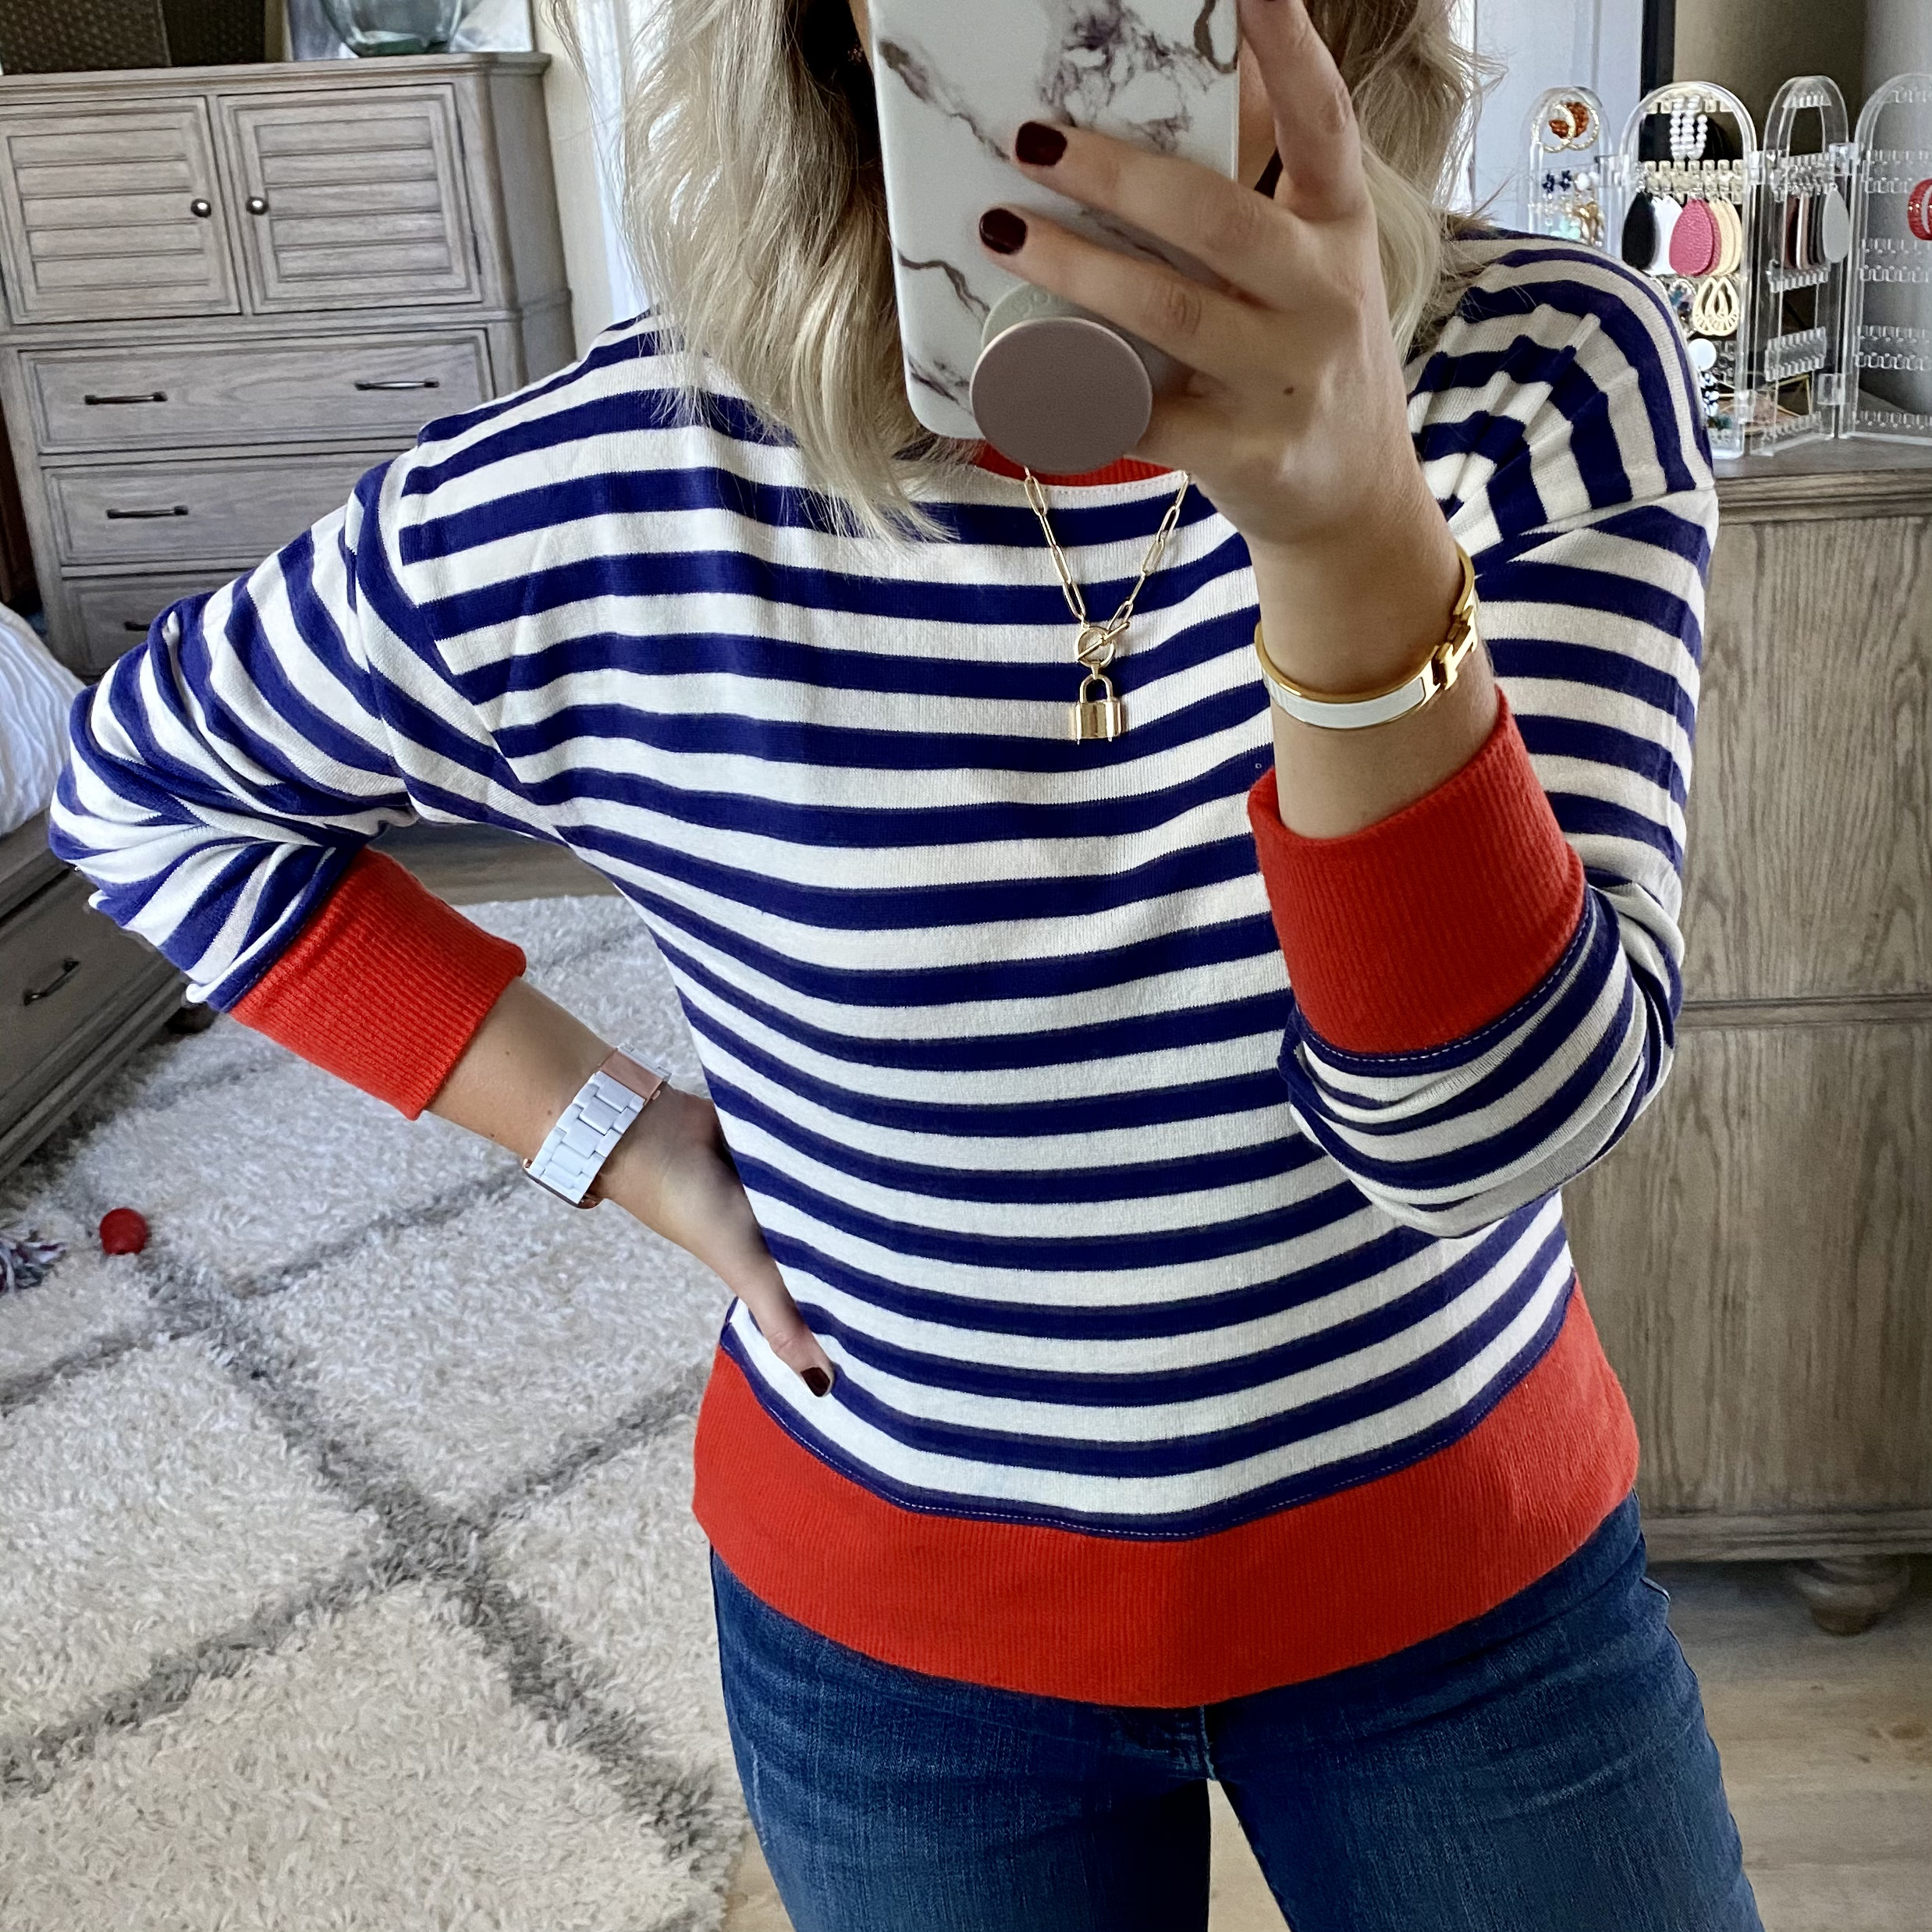 J.Crew super cozy striped mock neck sweater, Adidas white sneakers, Kut from the Kloth jeans